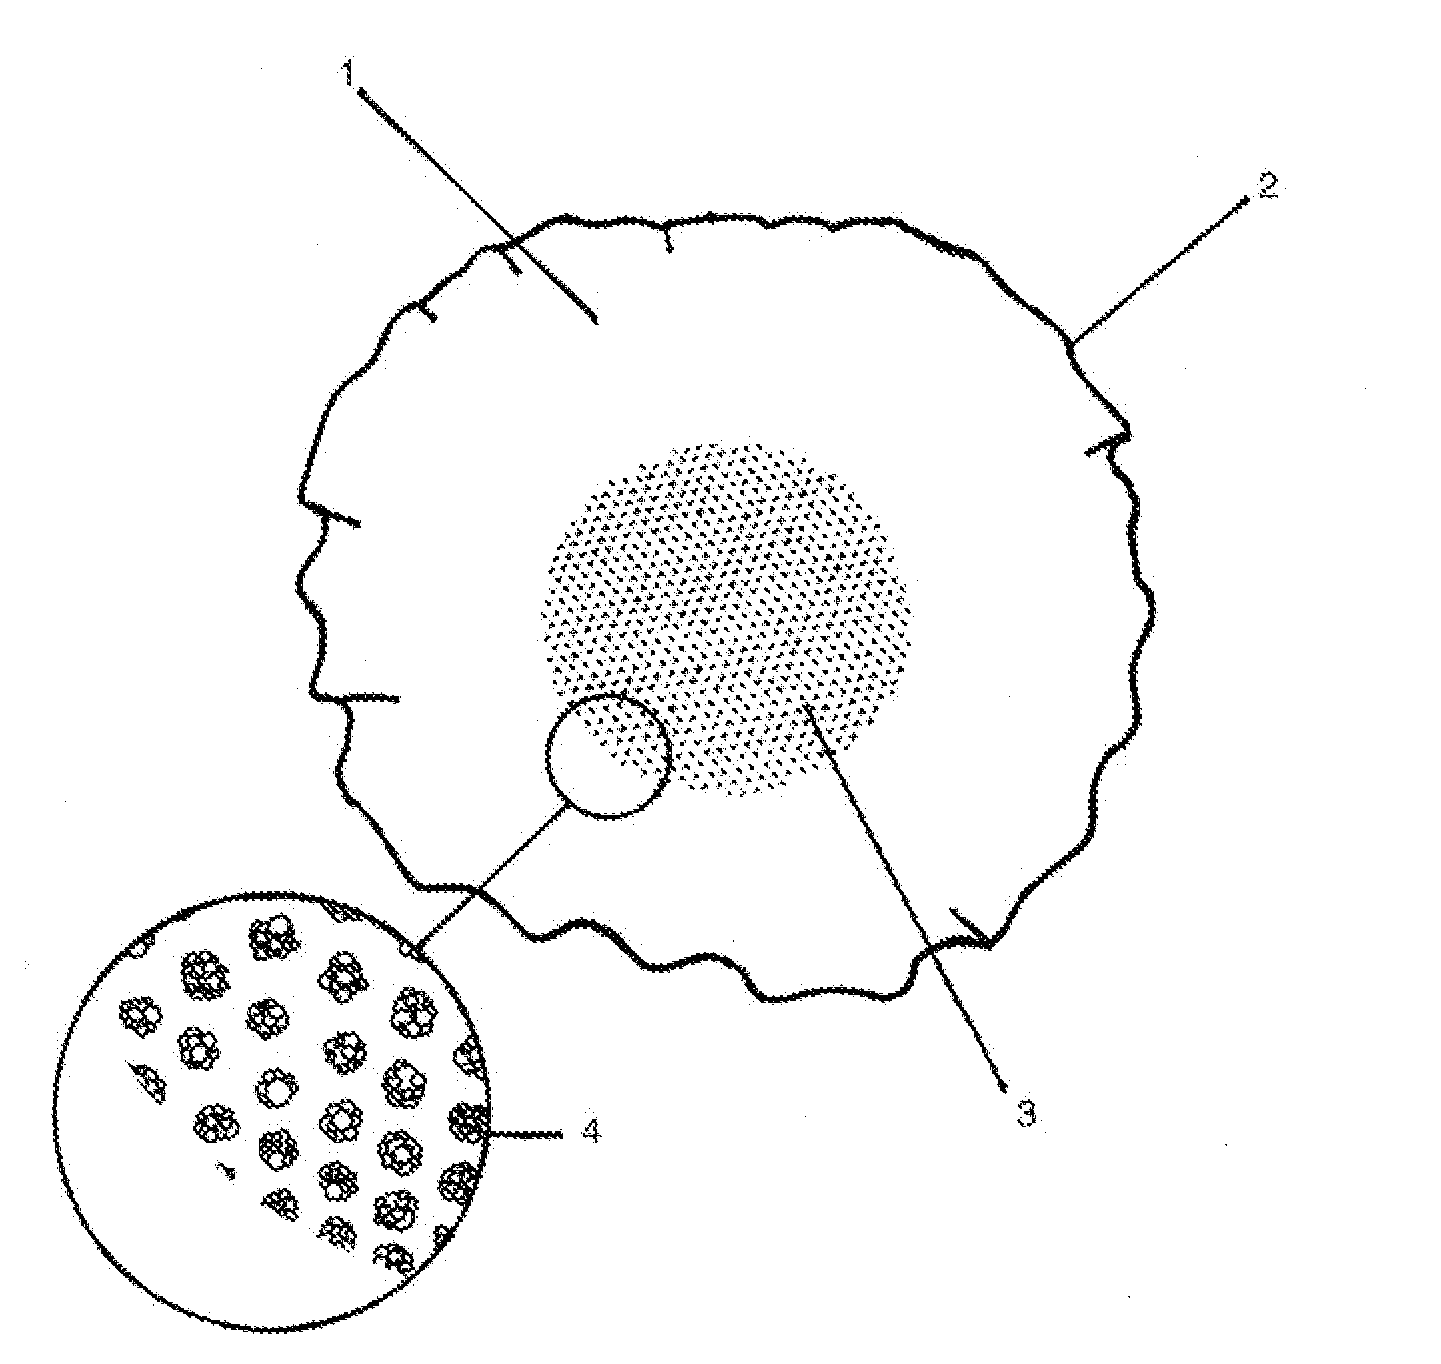 Method of enhancing beverages by means of a unique microencapsulated delivery system